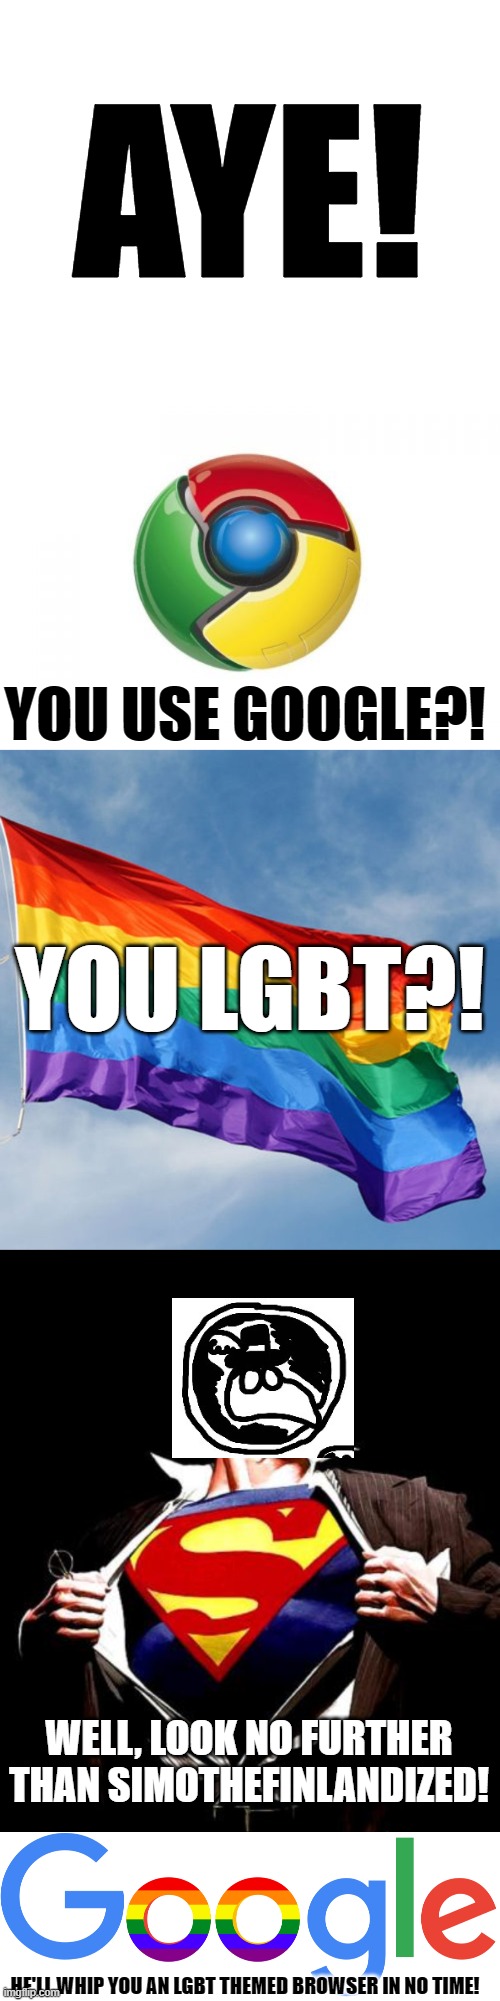 Just sayin' ¯\_(ツ)_/¯ if you wanna have an lgbt browser! | AYE! YOU USE GOOGLE?! YOU LGBT?! WELL, LOOK NO FURTHER THAN SIMOTHEFINLANDIZED! HE'LL WHIP YOU AN LGBT THEMED BROWSER IN NO TIME! | image tagged in blank white template,memes,google chrome,rainbow flag,superman | made w/ Imgflip meme maker